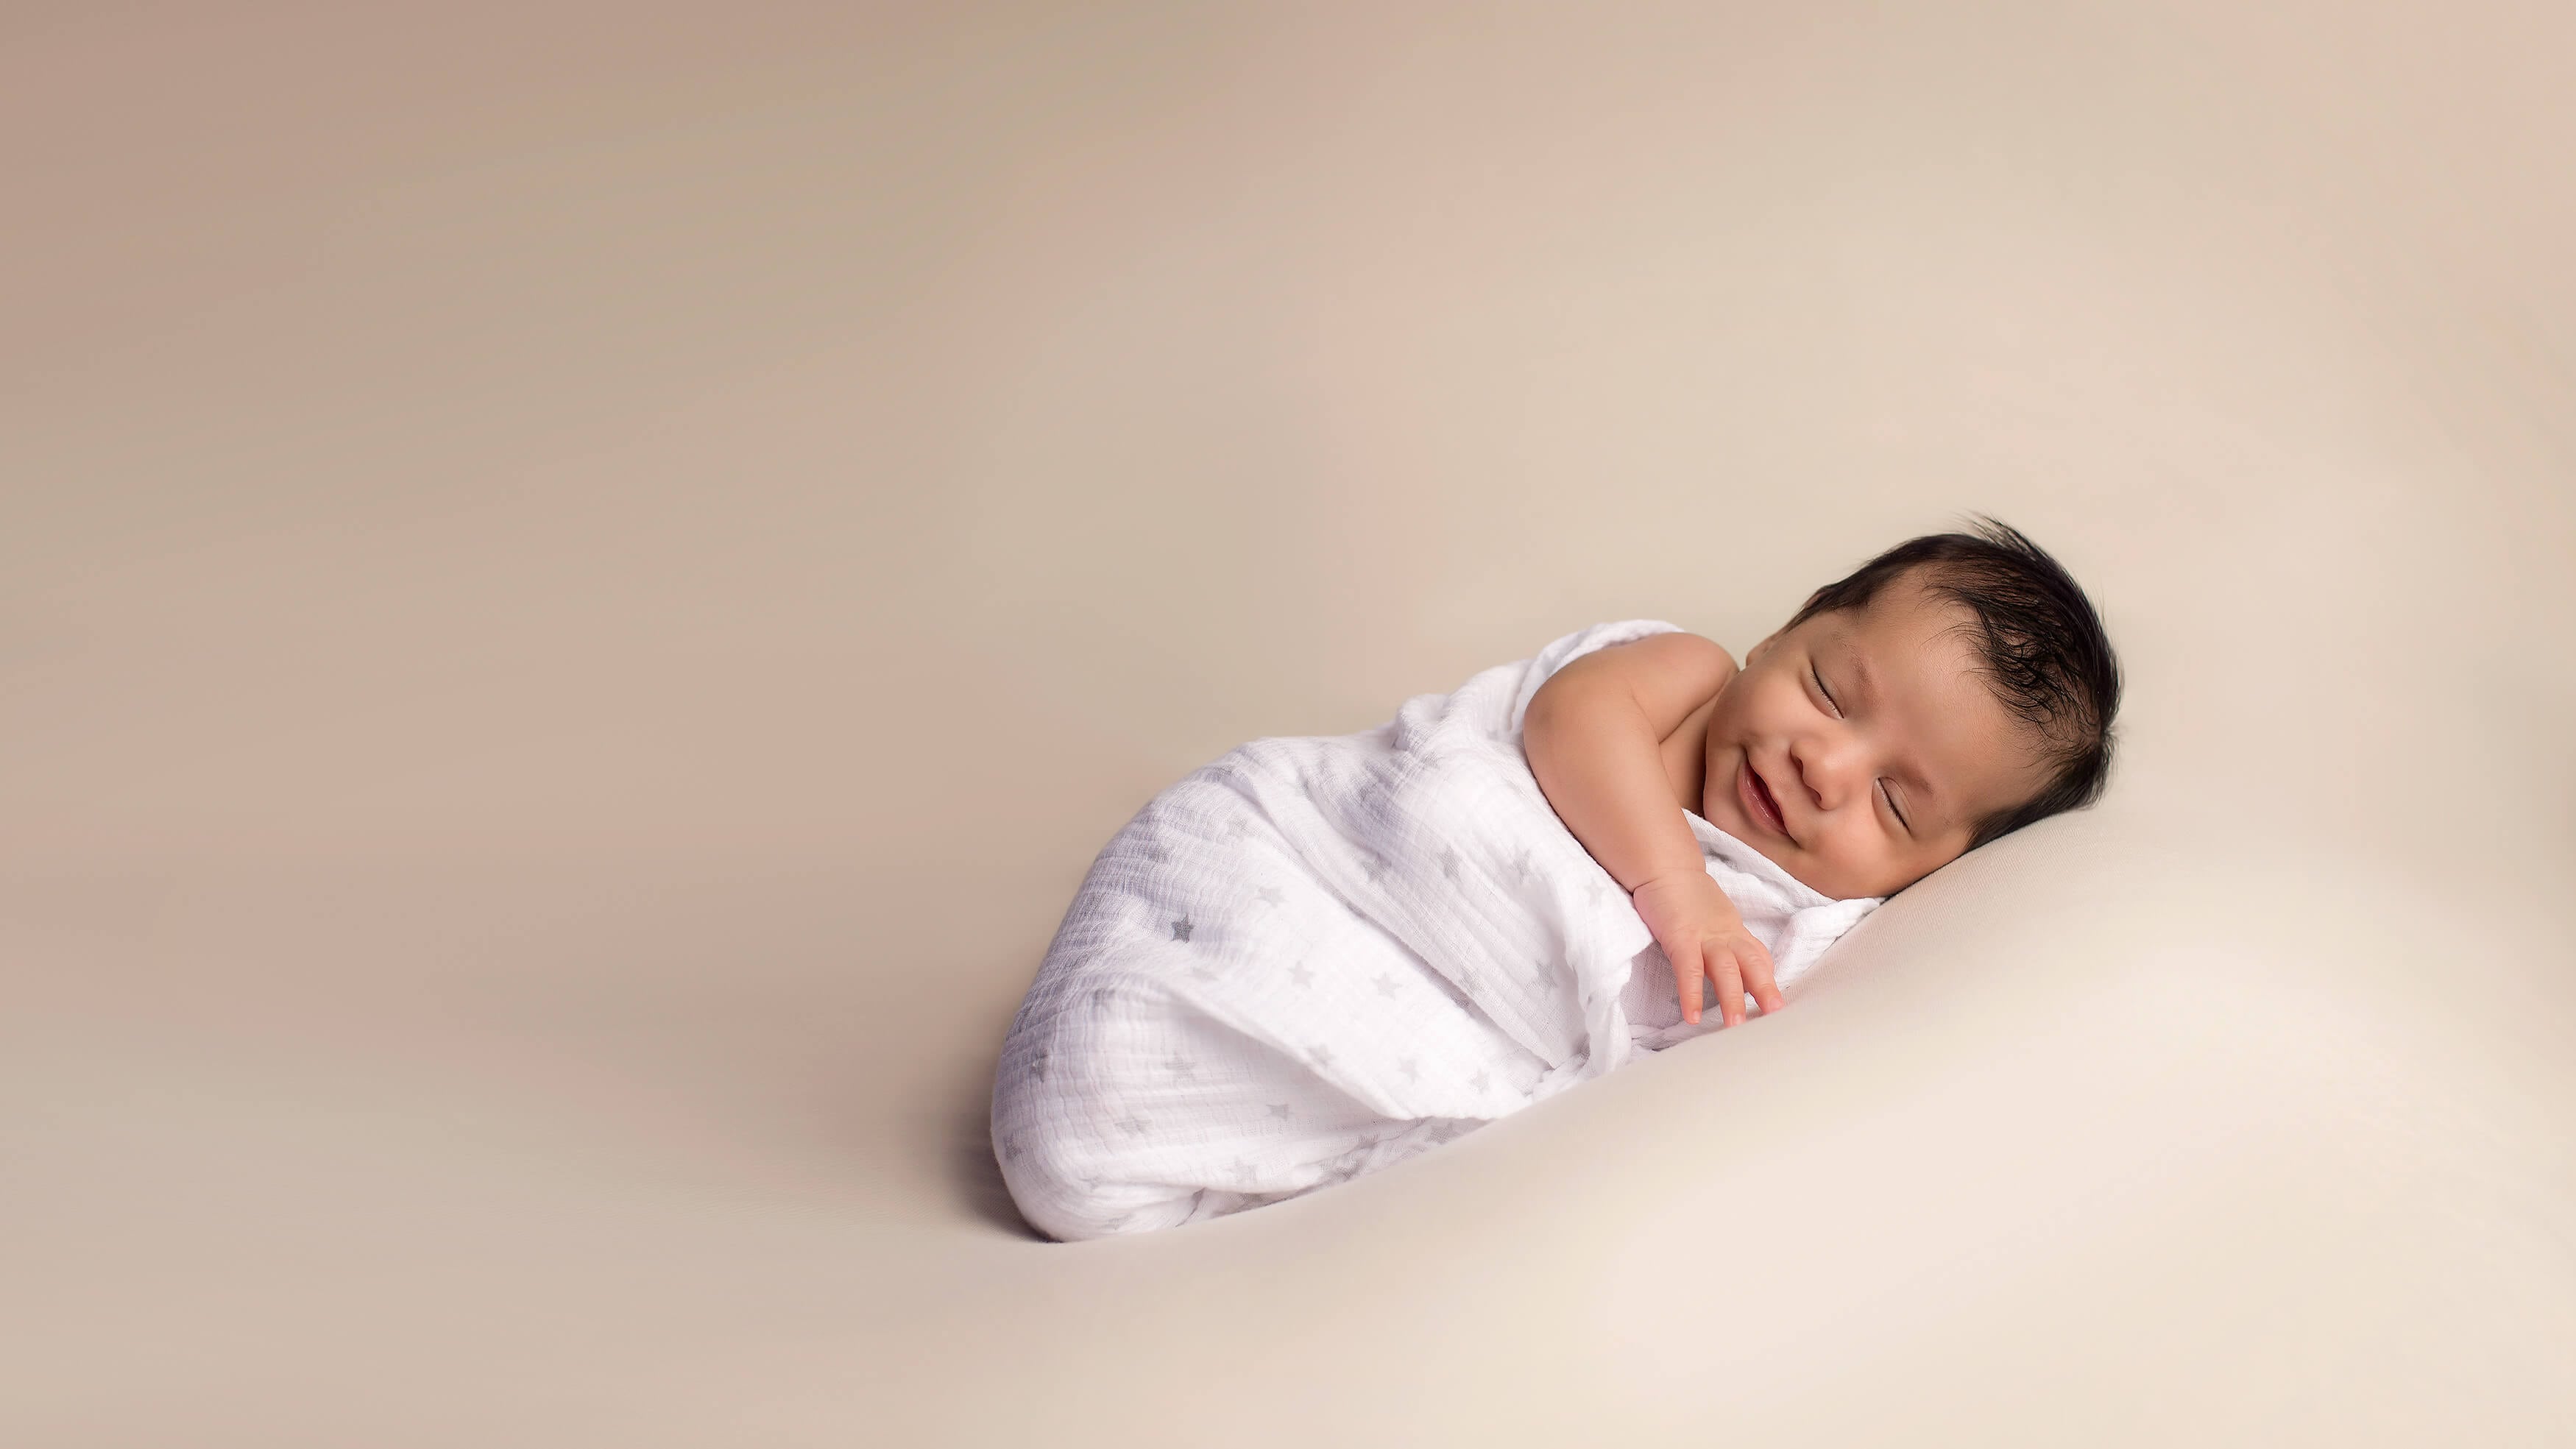 Newborn baby boy wrapped in a blanket, smiling.